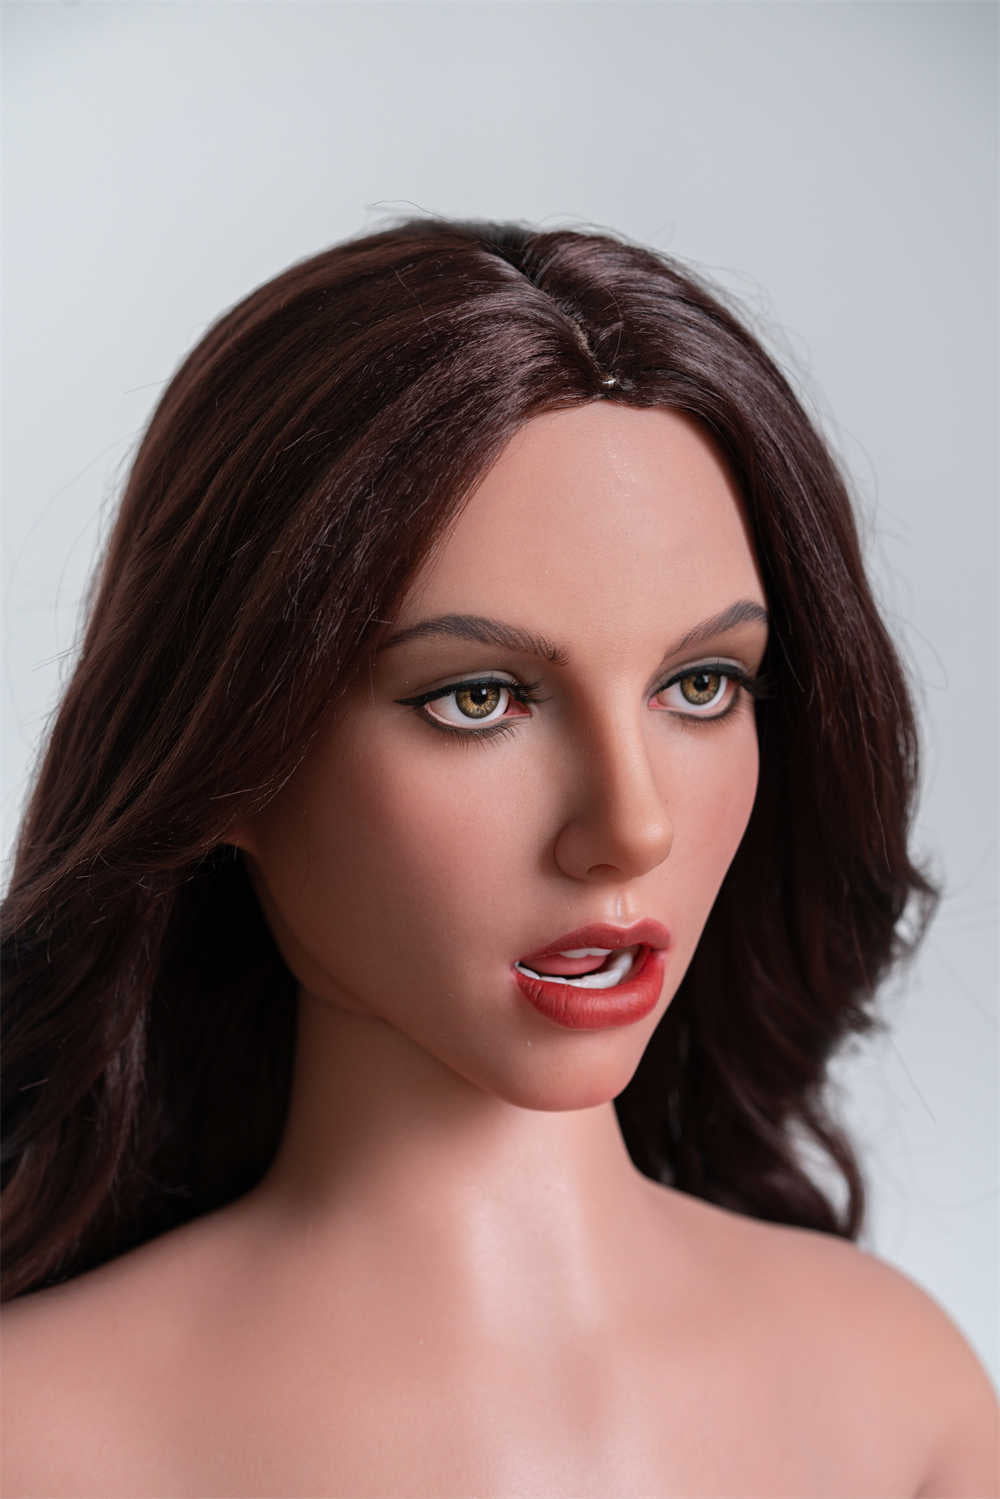 Zelex Doll SLE Series 172 cm E Silicone - ZXE206-2 Movable Jaw